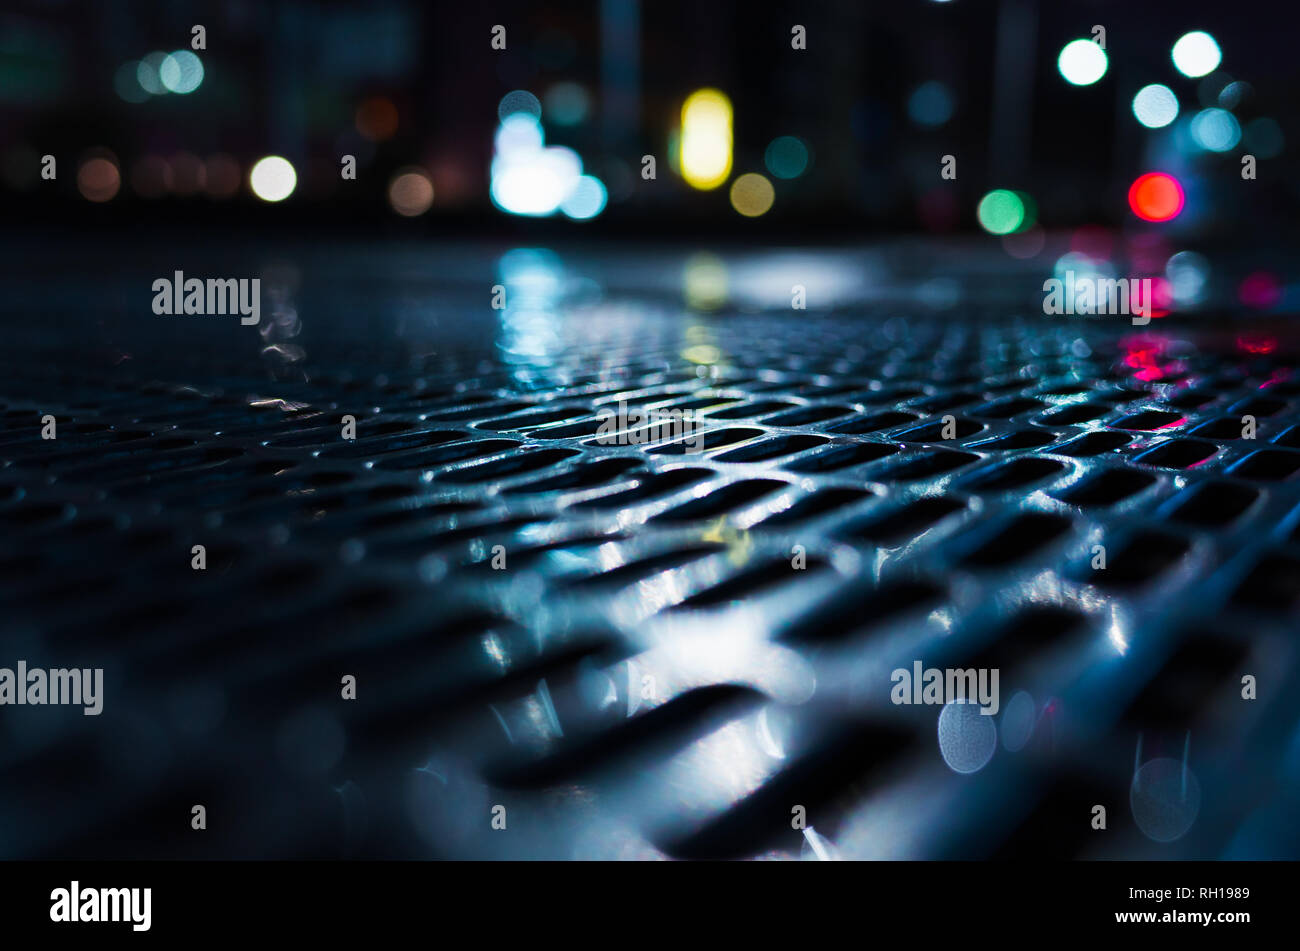 Abstract night city background with shiny wet street sewer grate on urban road, close-up photo with selective focus Stock Photo